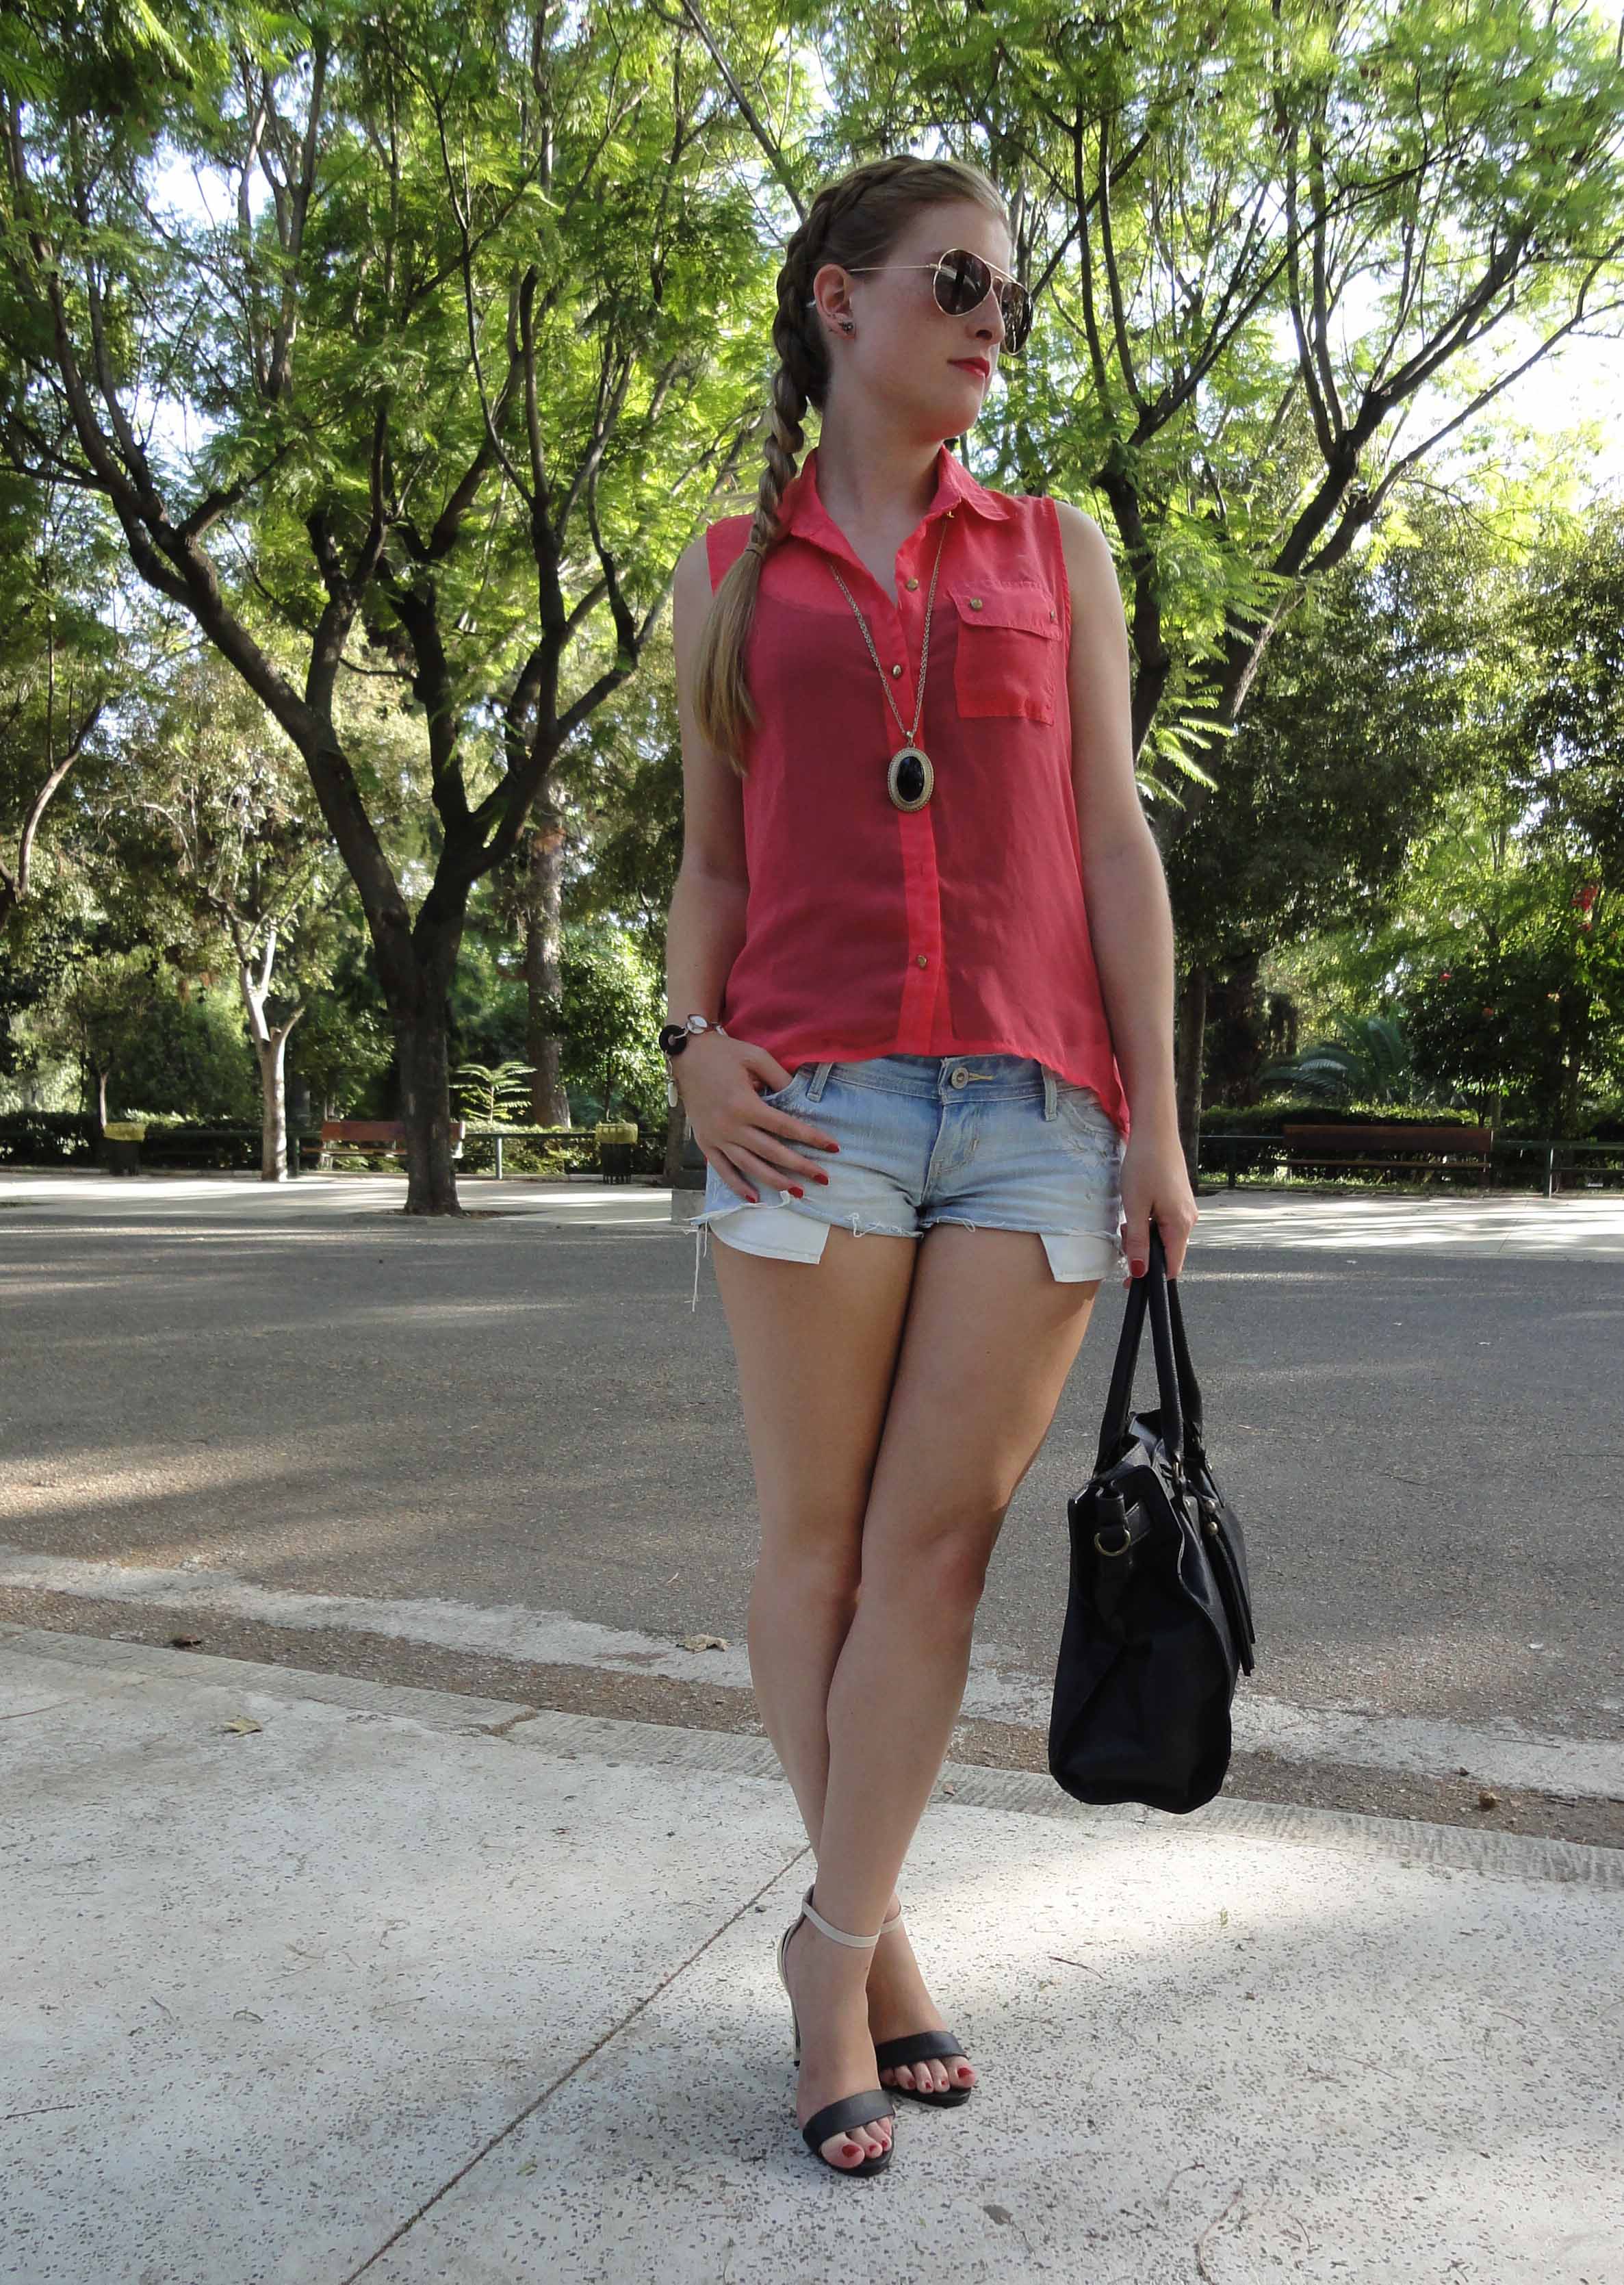 Pink Blouse Streestyle Outfit Jeanshotpants Hollister Athens Athen Griechenland Modeblog Sightseeing Look